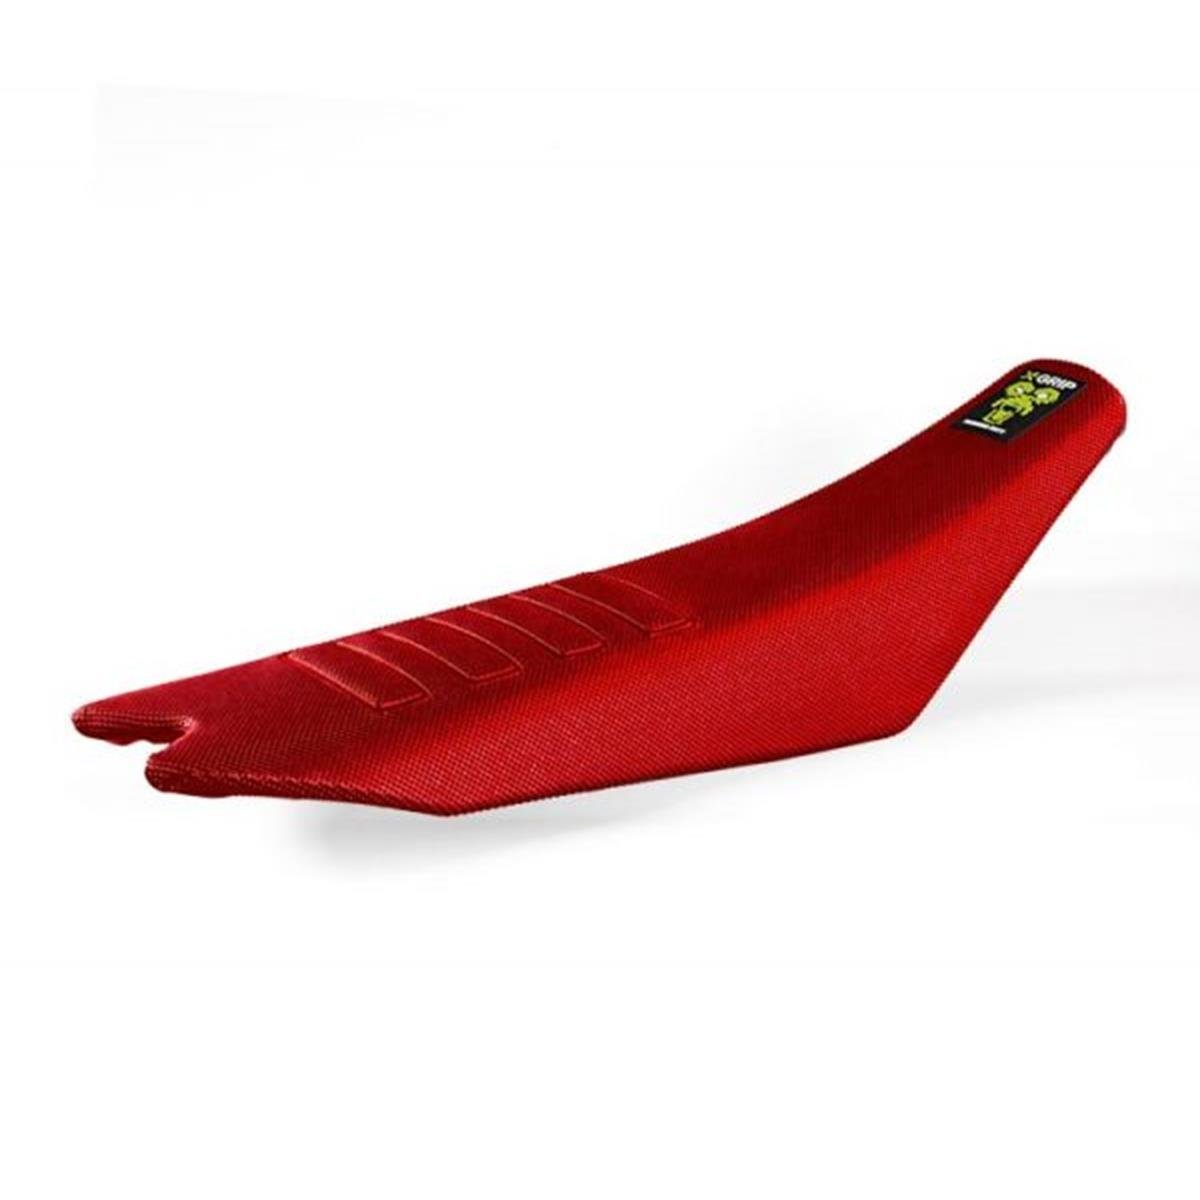 X-Grip Seat Cover Baboons Butt Beta RR, XTrainer 13-19, Red